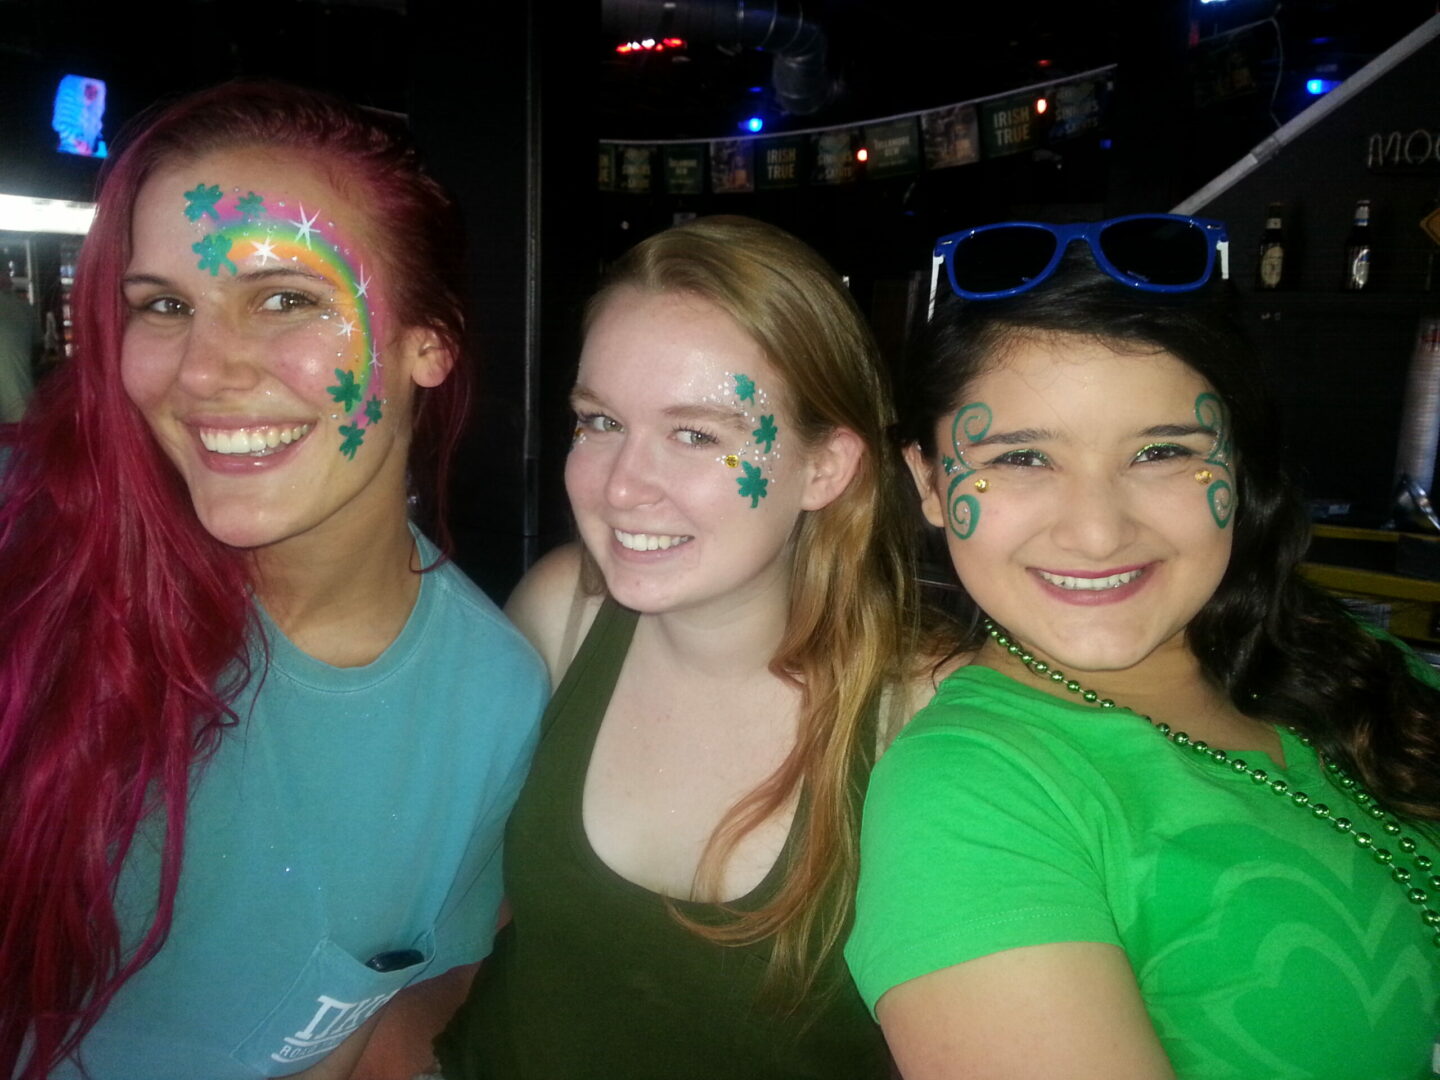 Three girls with face paint on their faces.